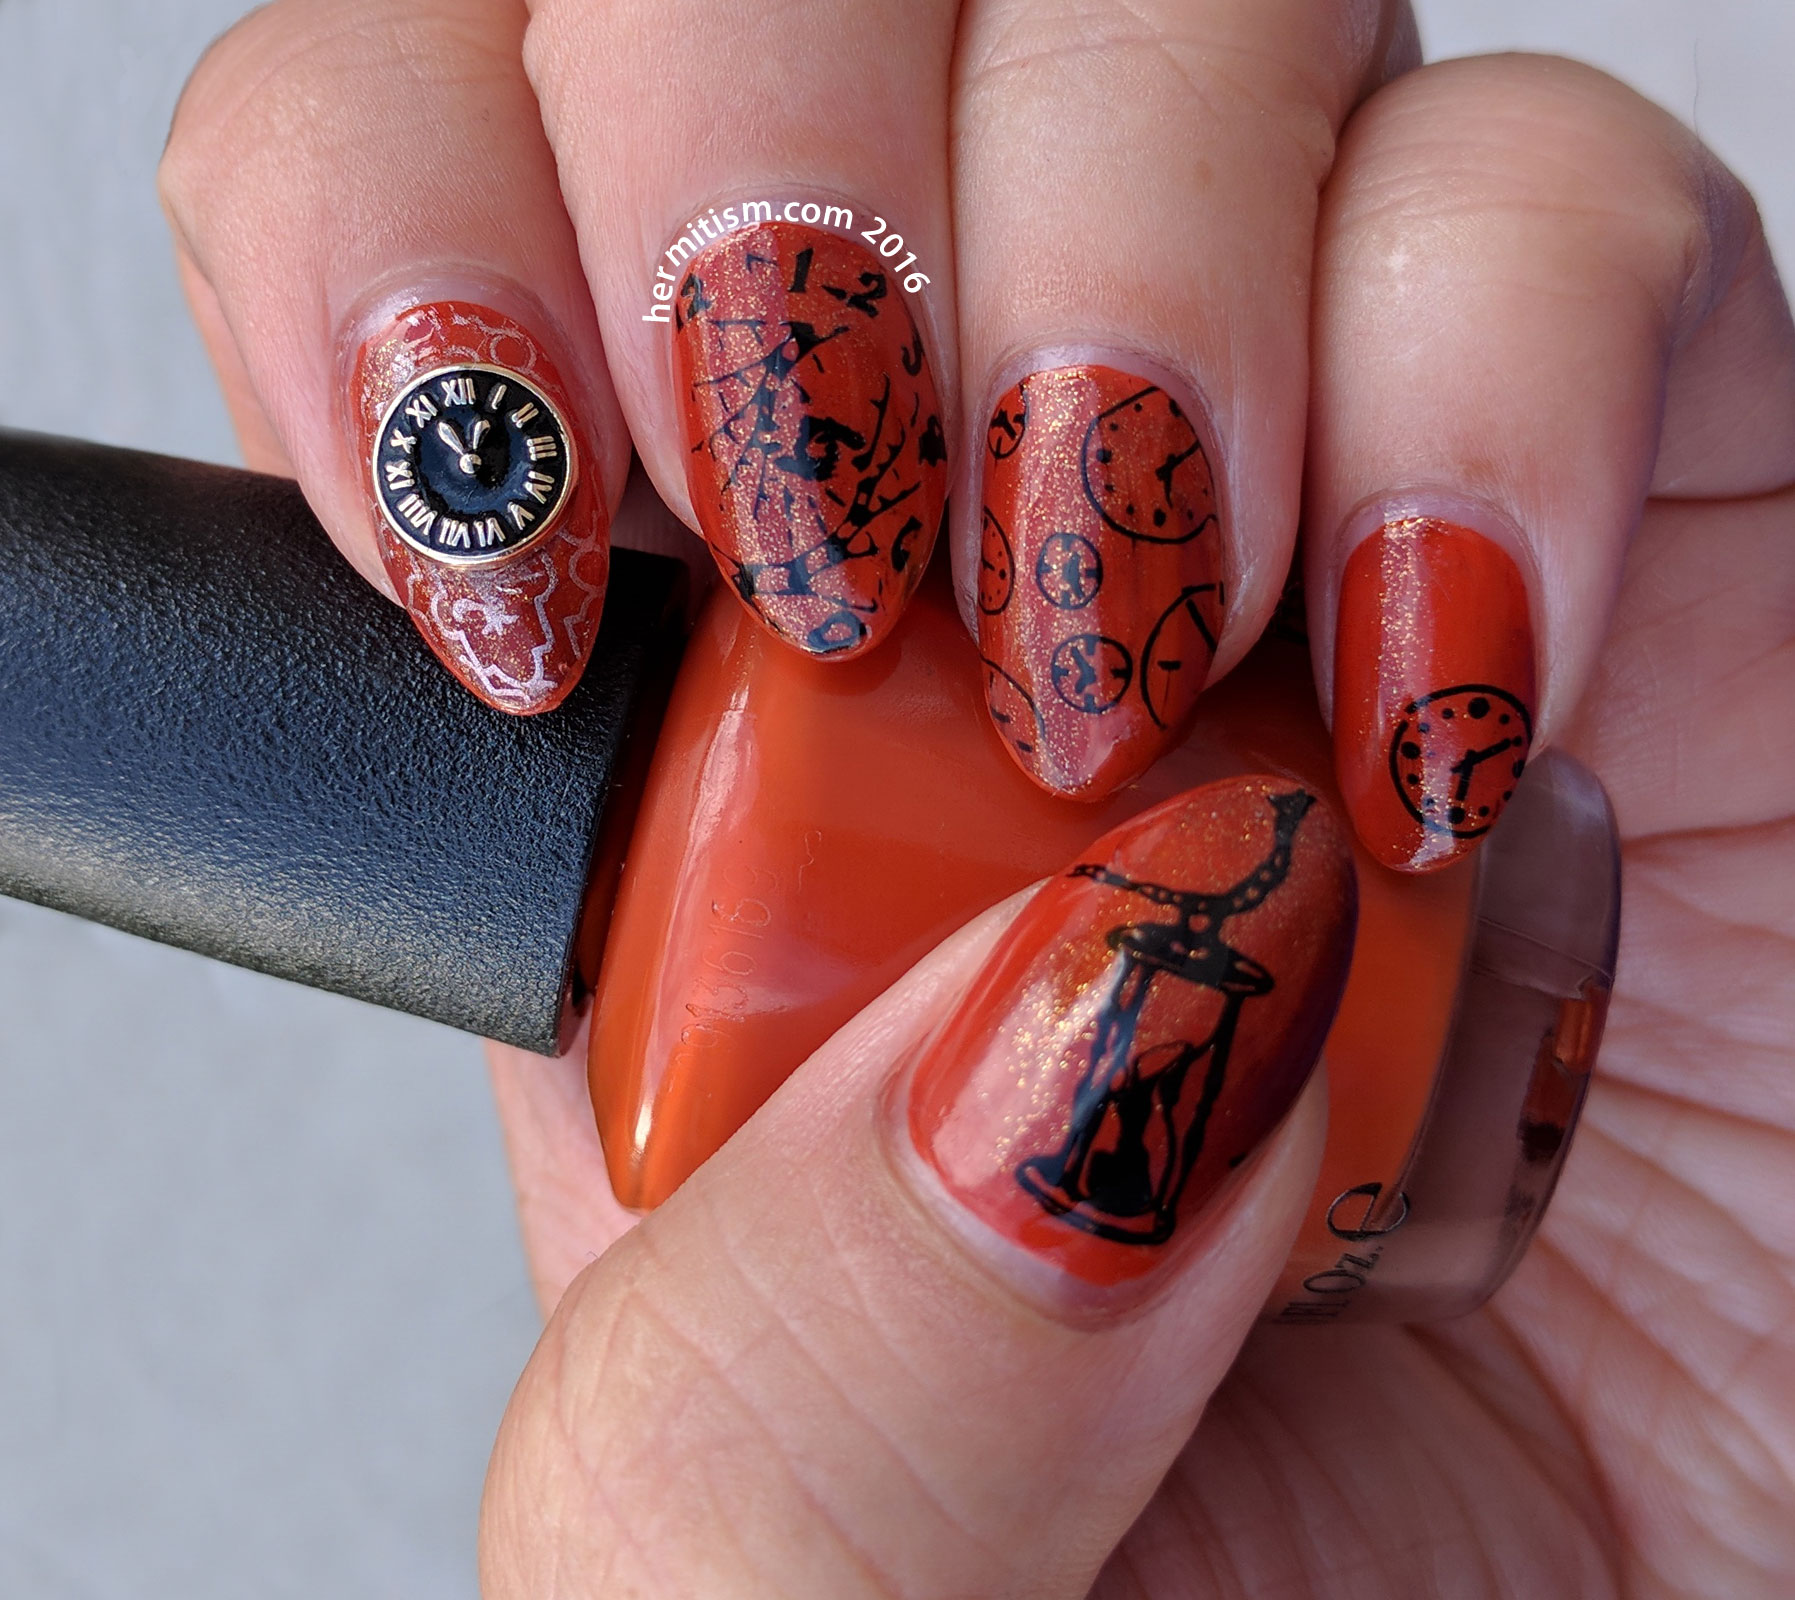 T is for TIme - ABC Nail Art Challenge - 31 Day Challenge (color) - Hermit Werds